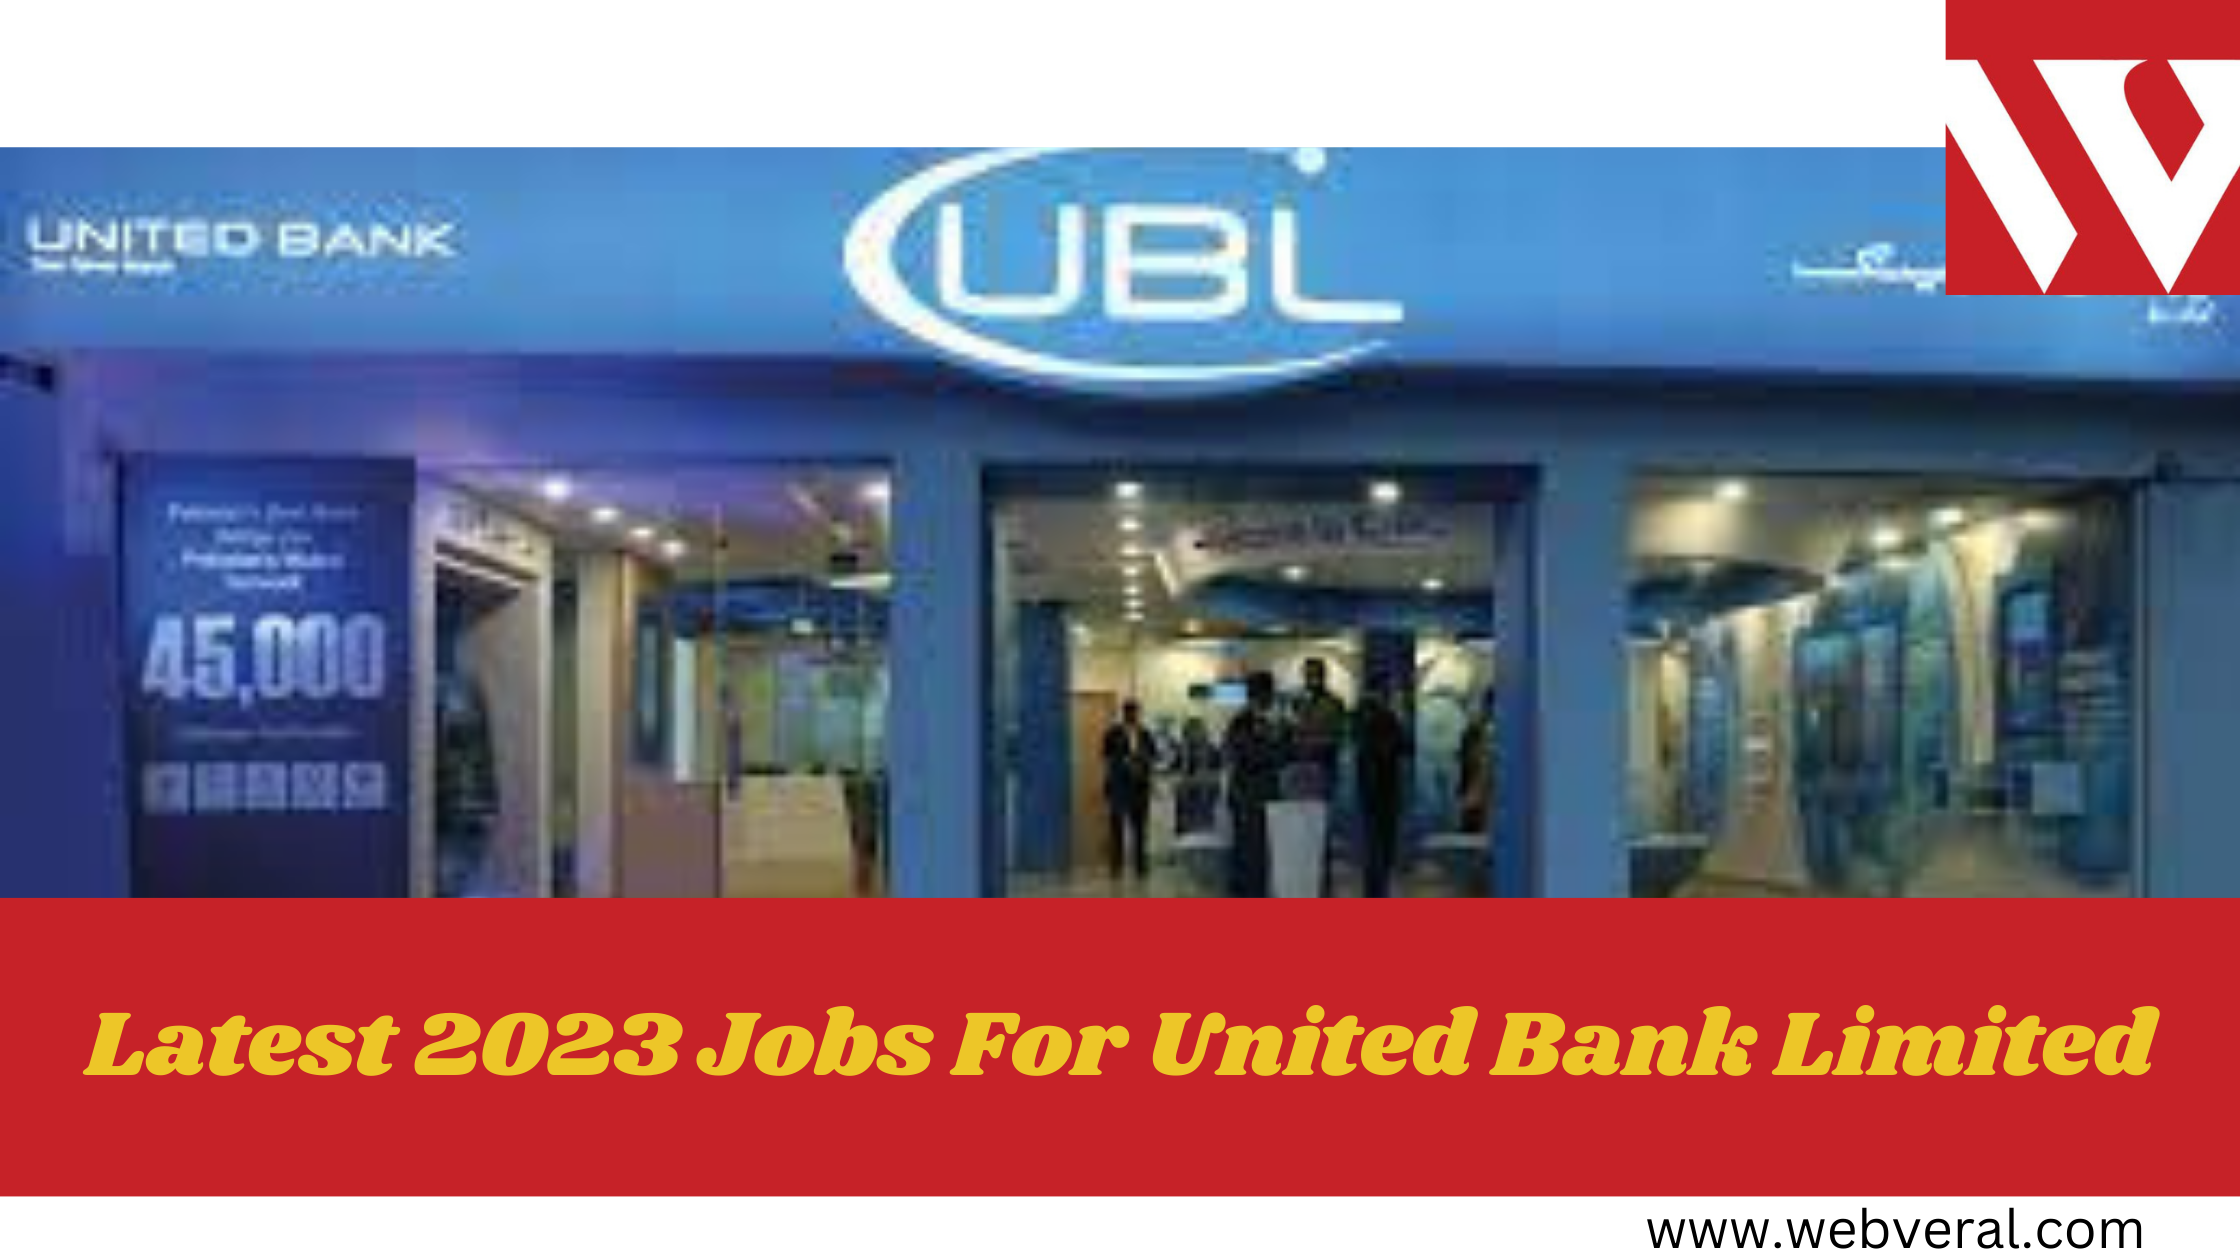 Latest 2023 Jobs For United Bank Limited